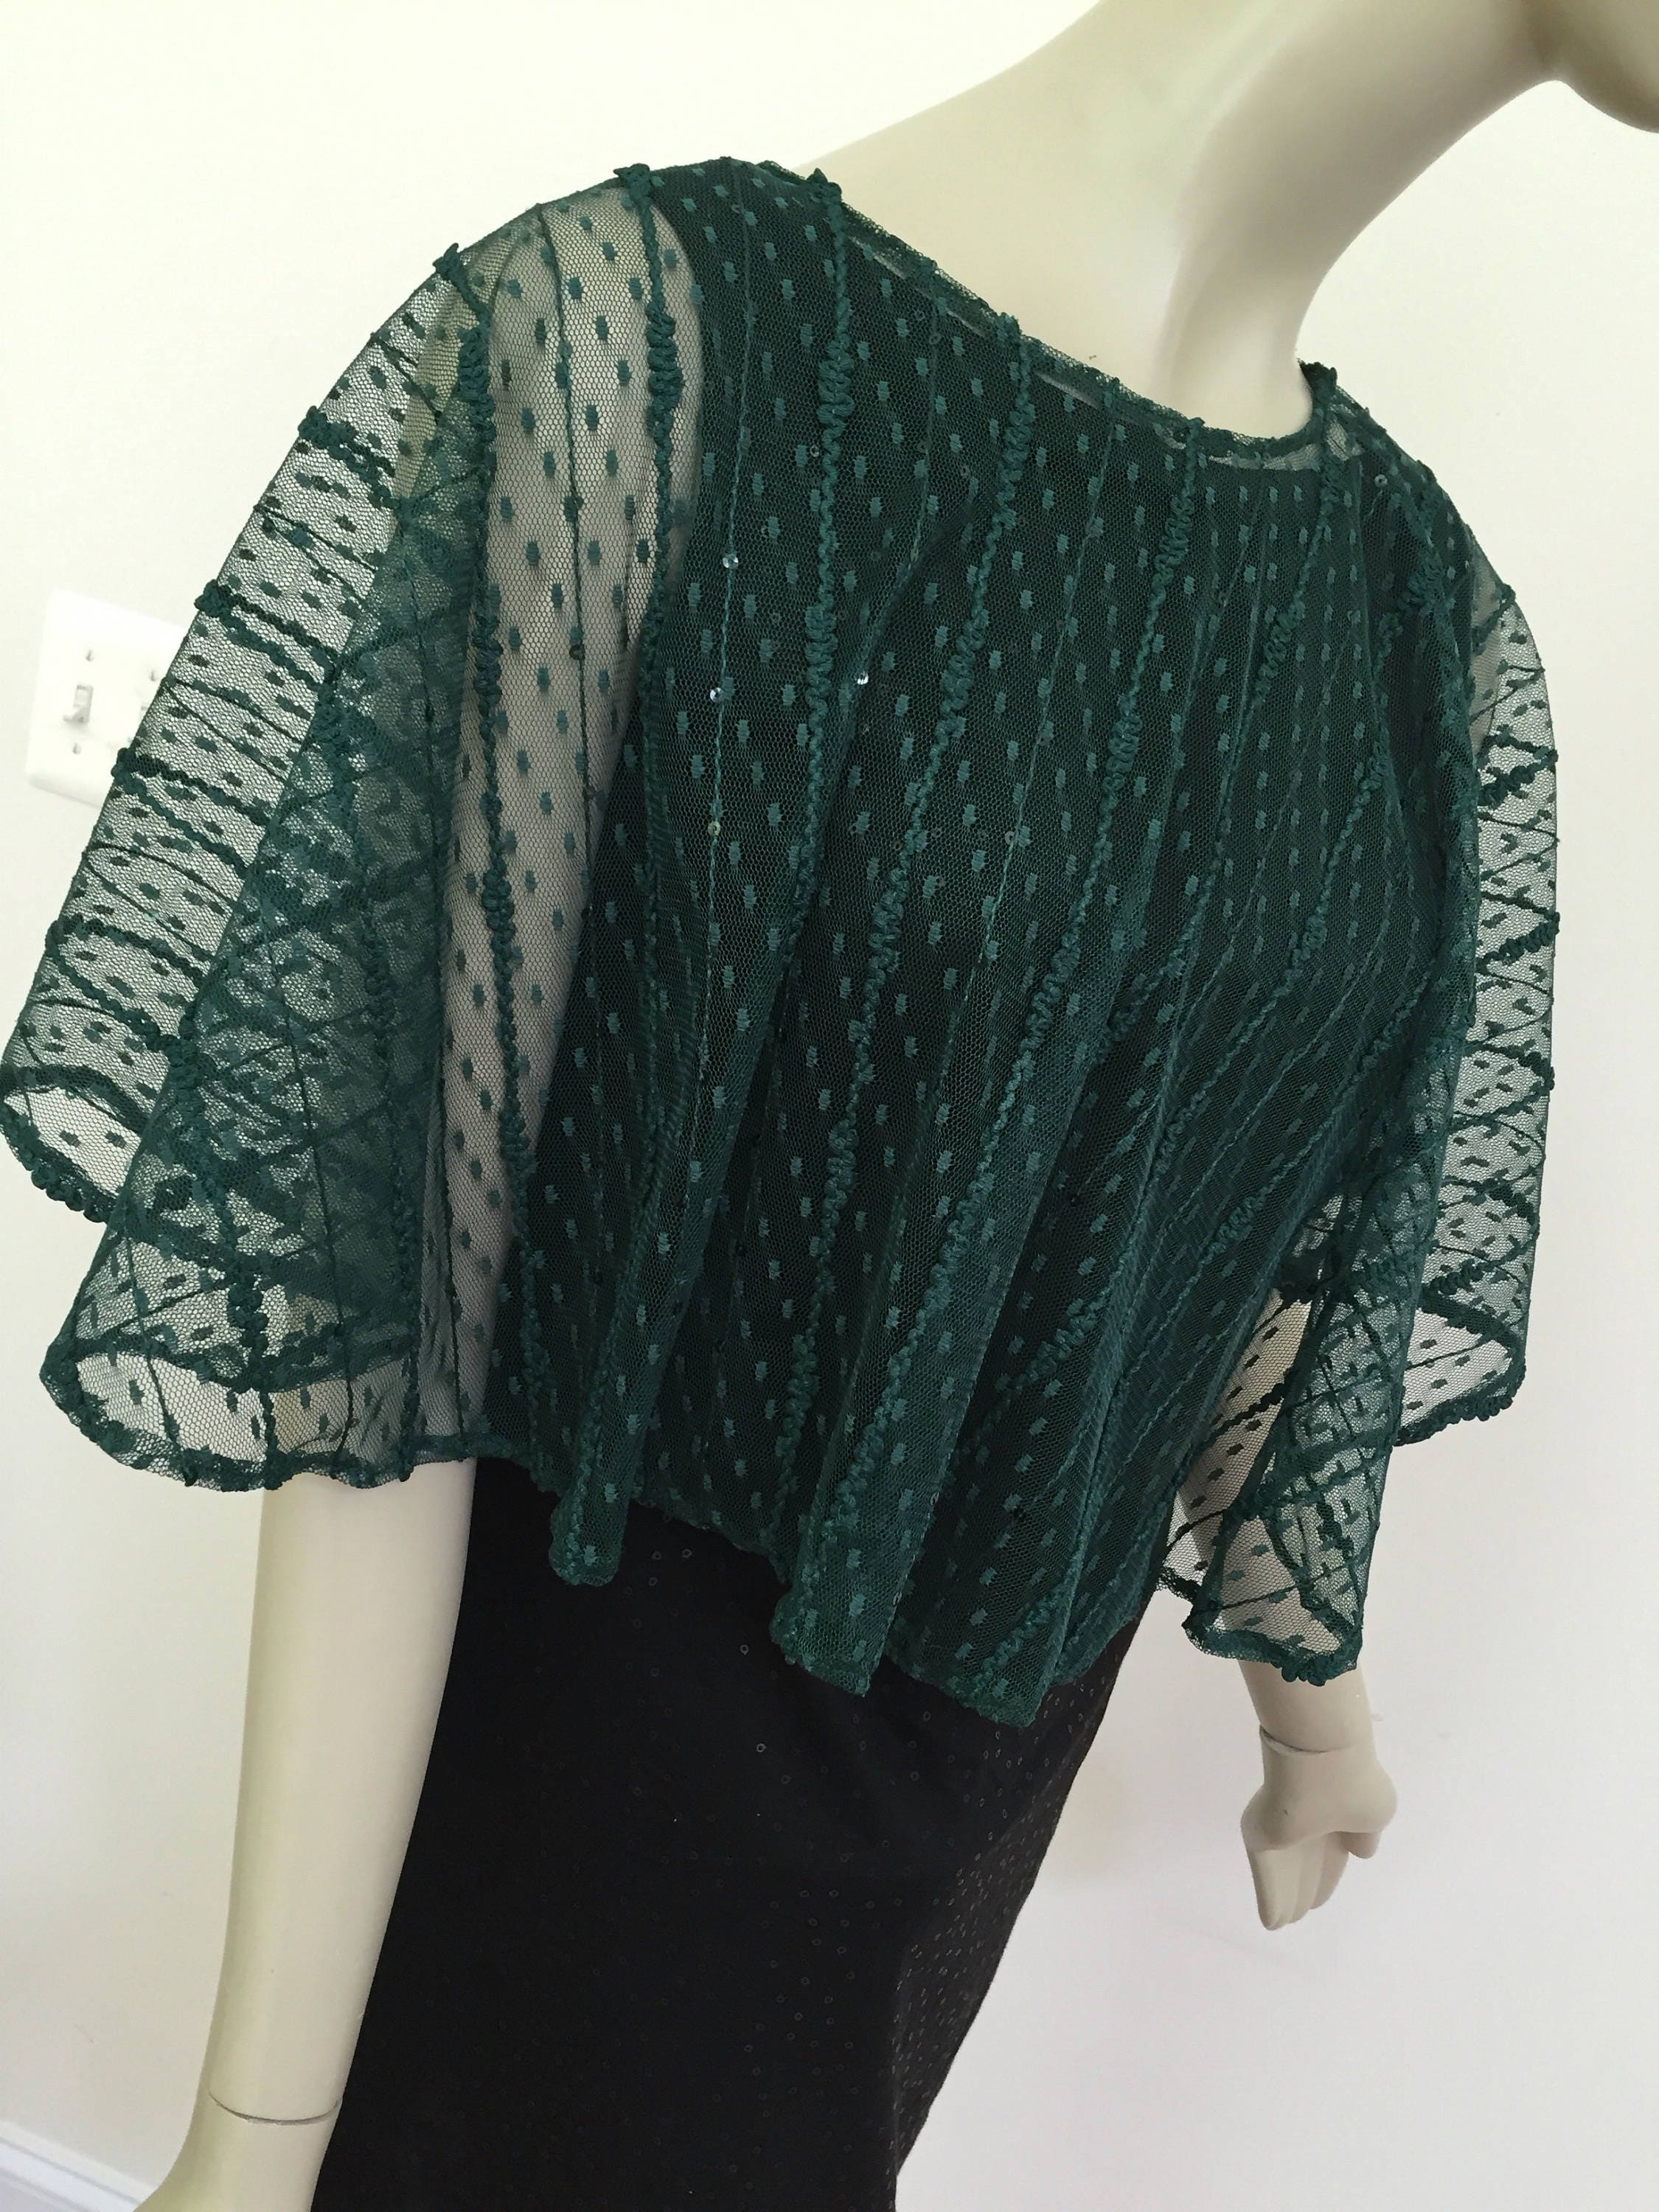 Green Lace Sequin Sheer Cape. Women's Sparkly Evening